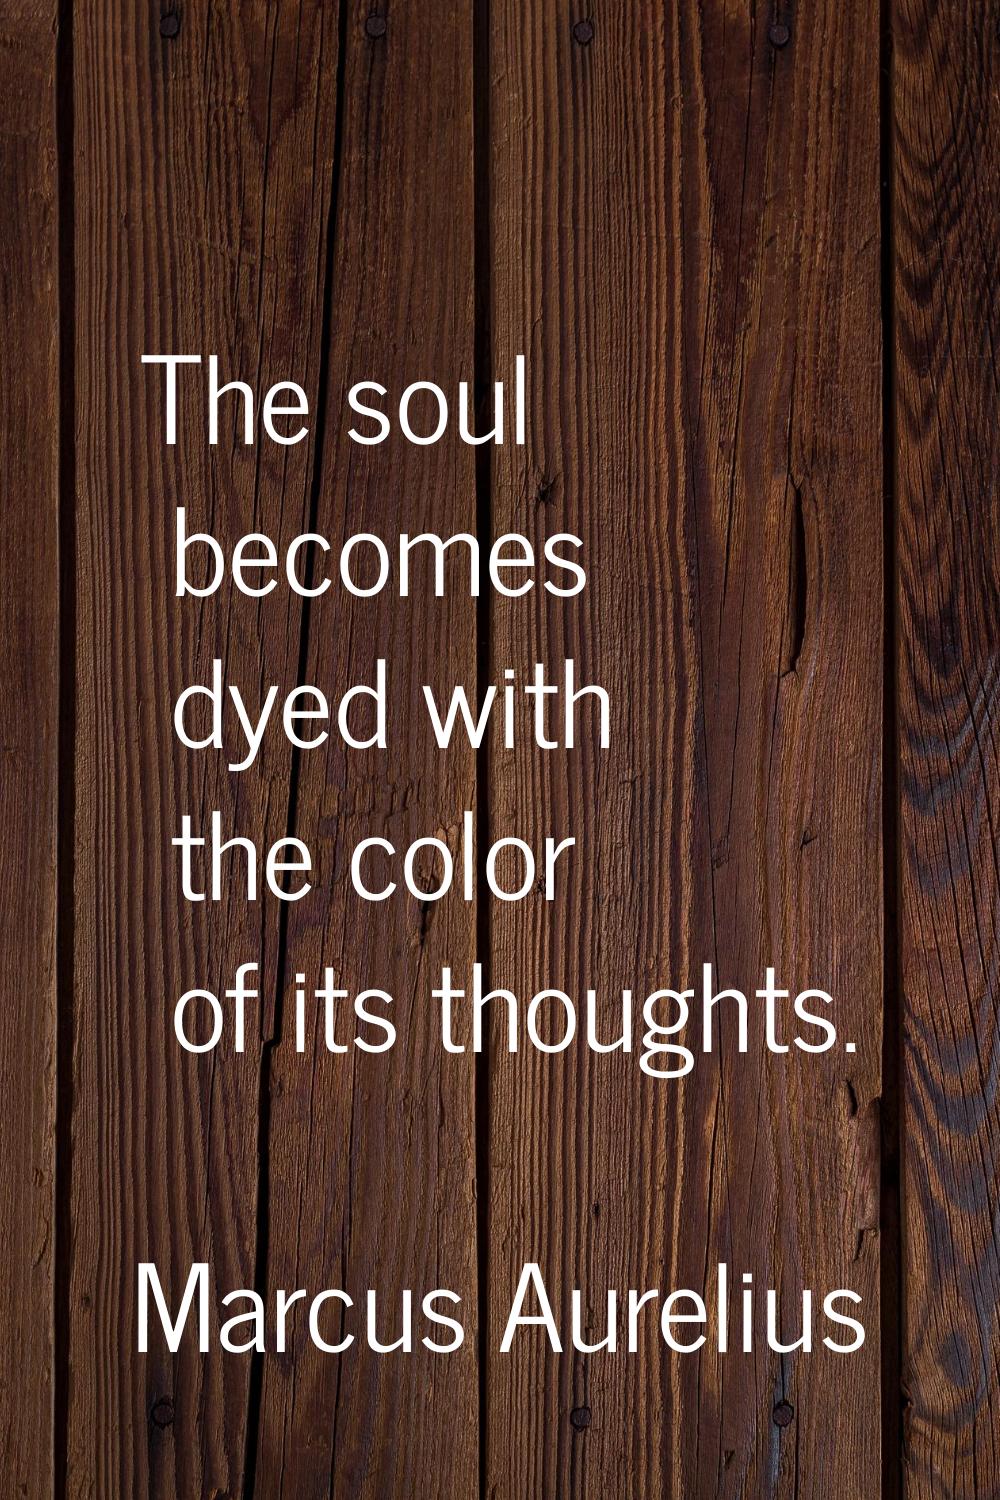 The soul becomes dyed with the color of its thoughts.